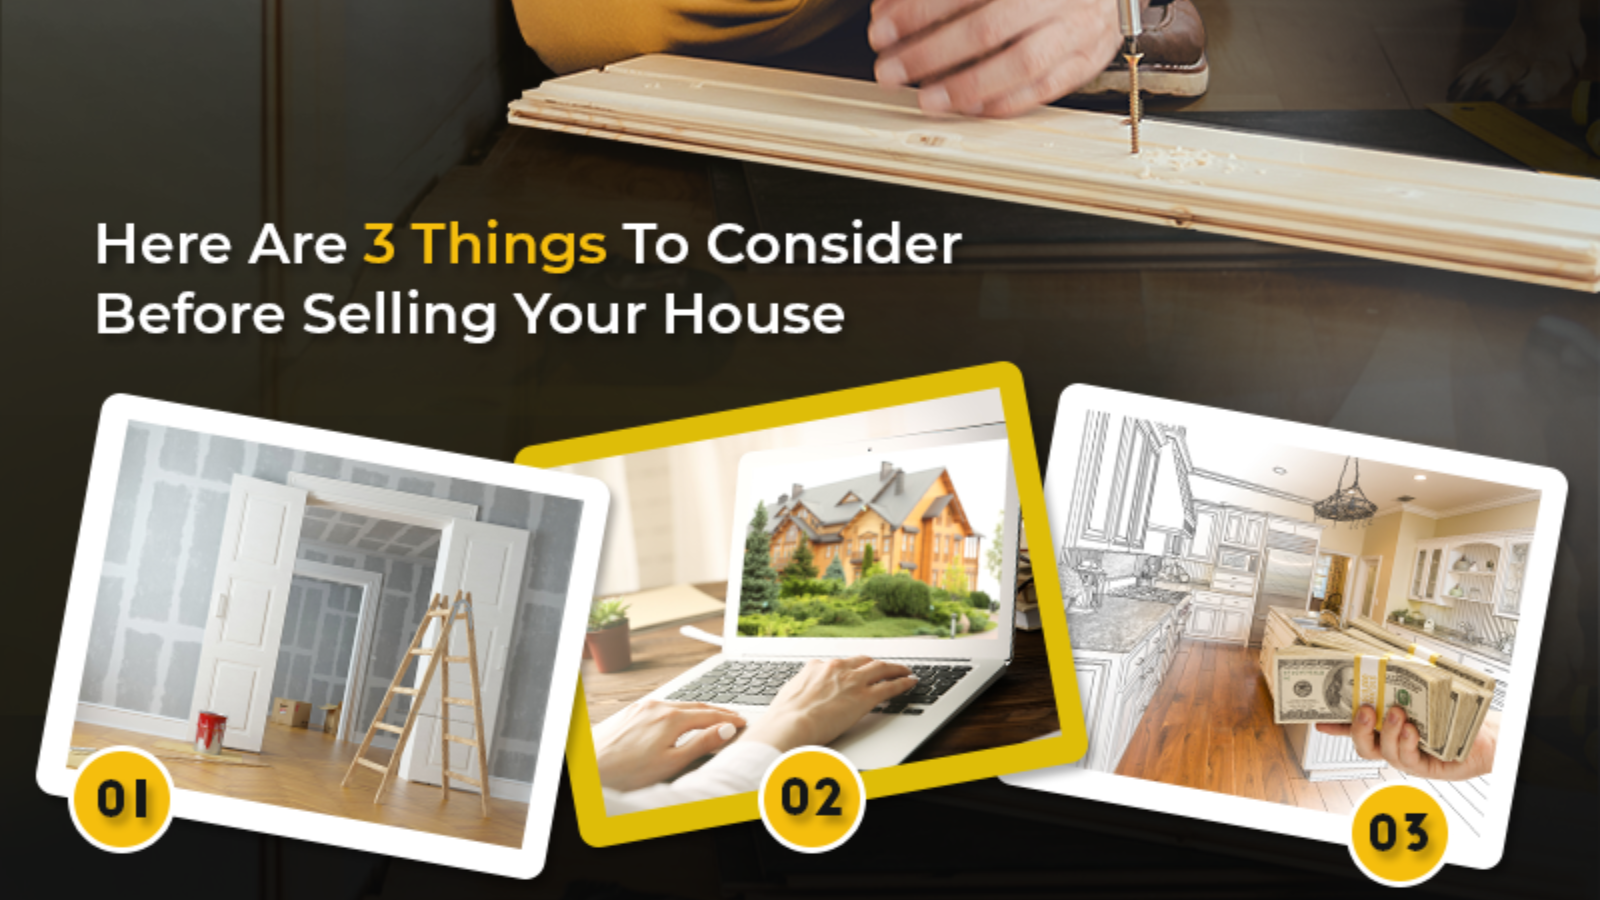 Should You Renovate or Not? Here Are 3 Things To Consider Before Selling Your House